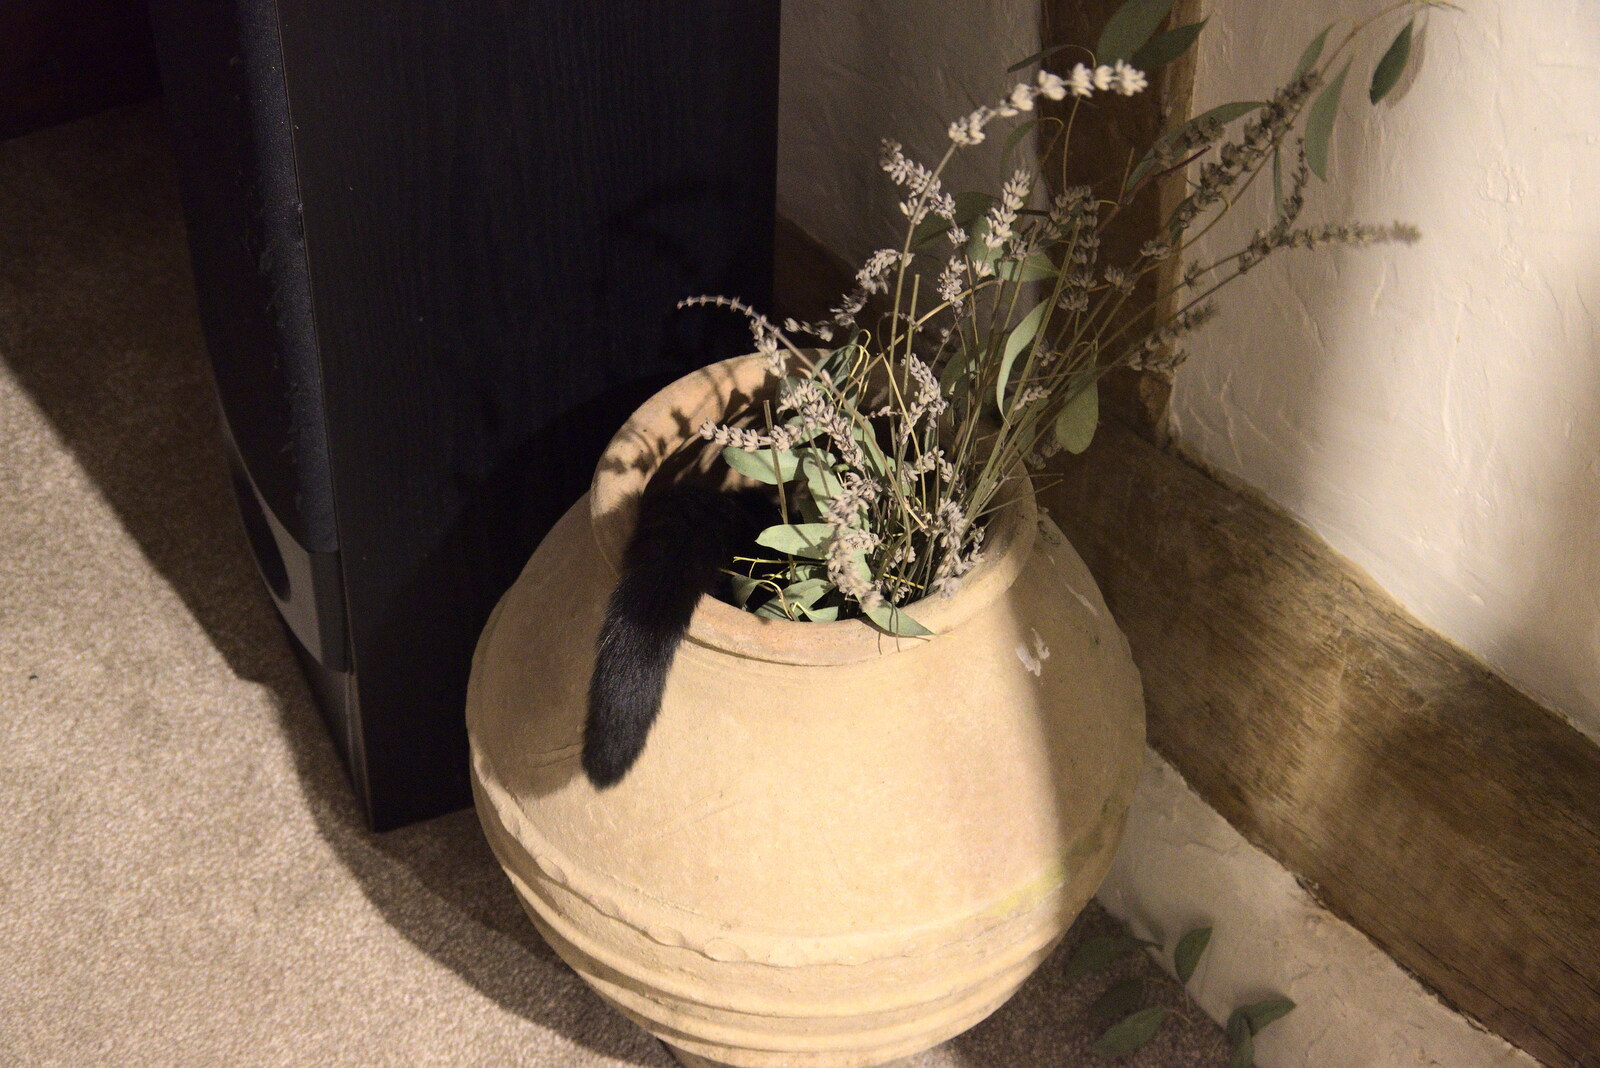 There's a cat in a terracotta urn from Supercharged Electrons and Pizza at the Village Hall, Brome, Suffolk - 23rd January 2022